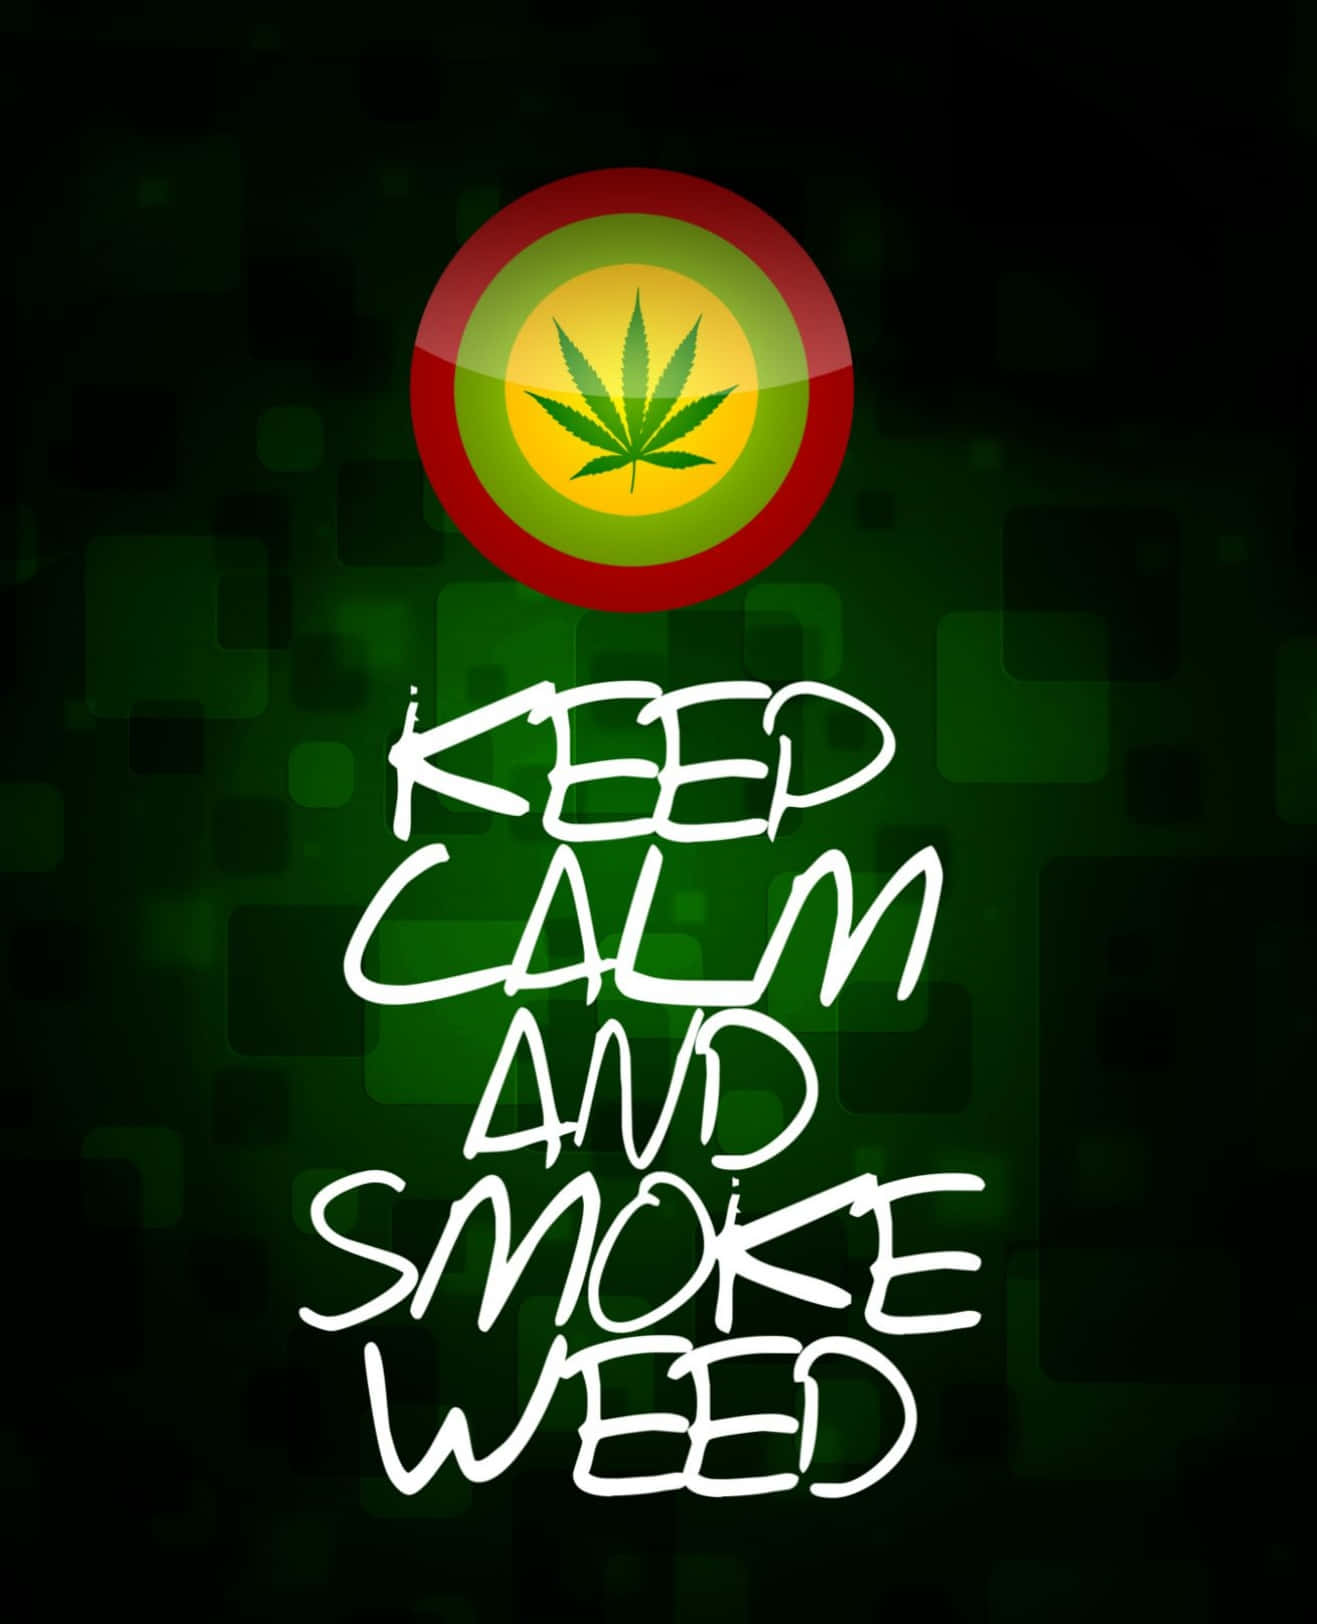 Download Shit Dope Weed Republic Wallpaper | Wallpapers.com